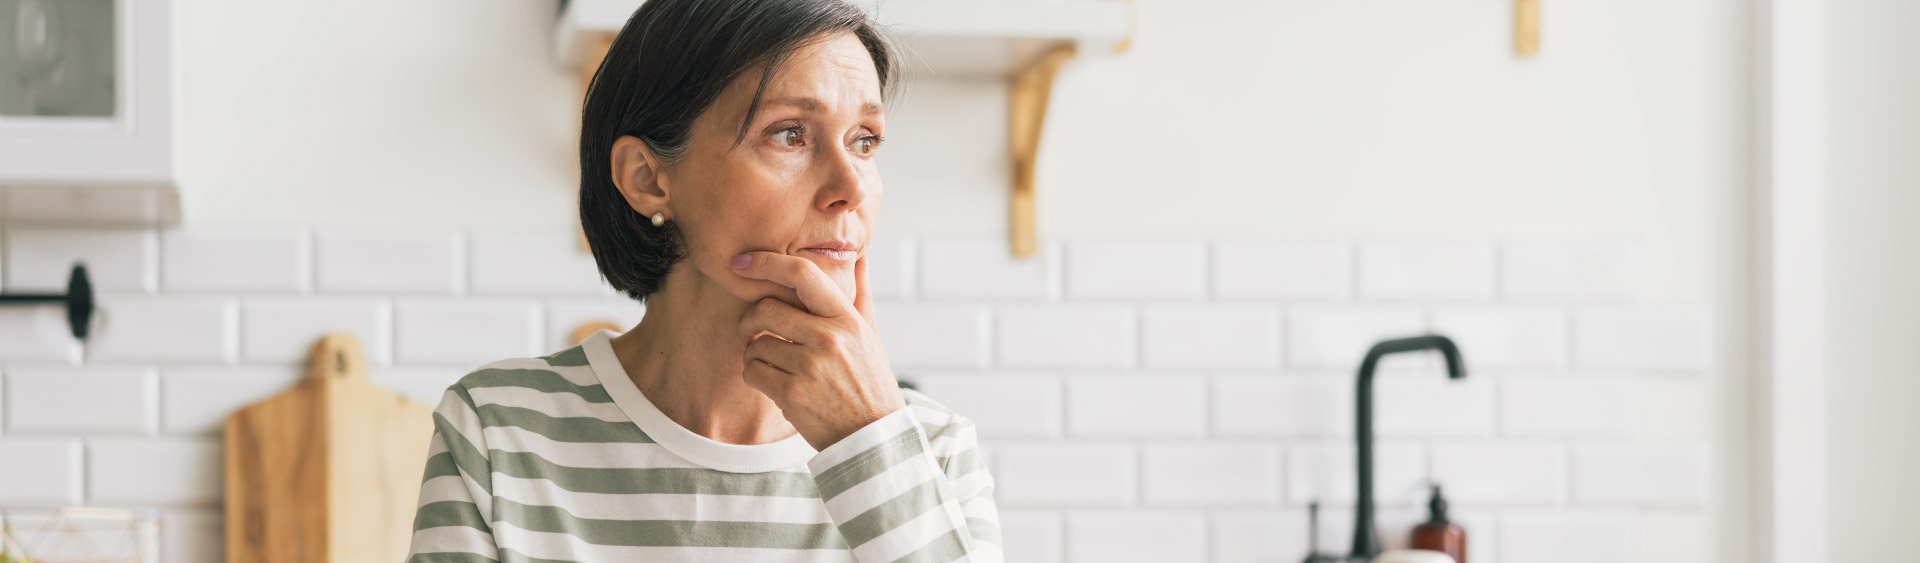 A woman sits, resting her chin on her hand, looking worried. Her anxiety can exacerbate her incontinence.